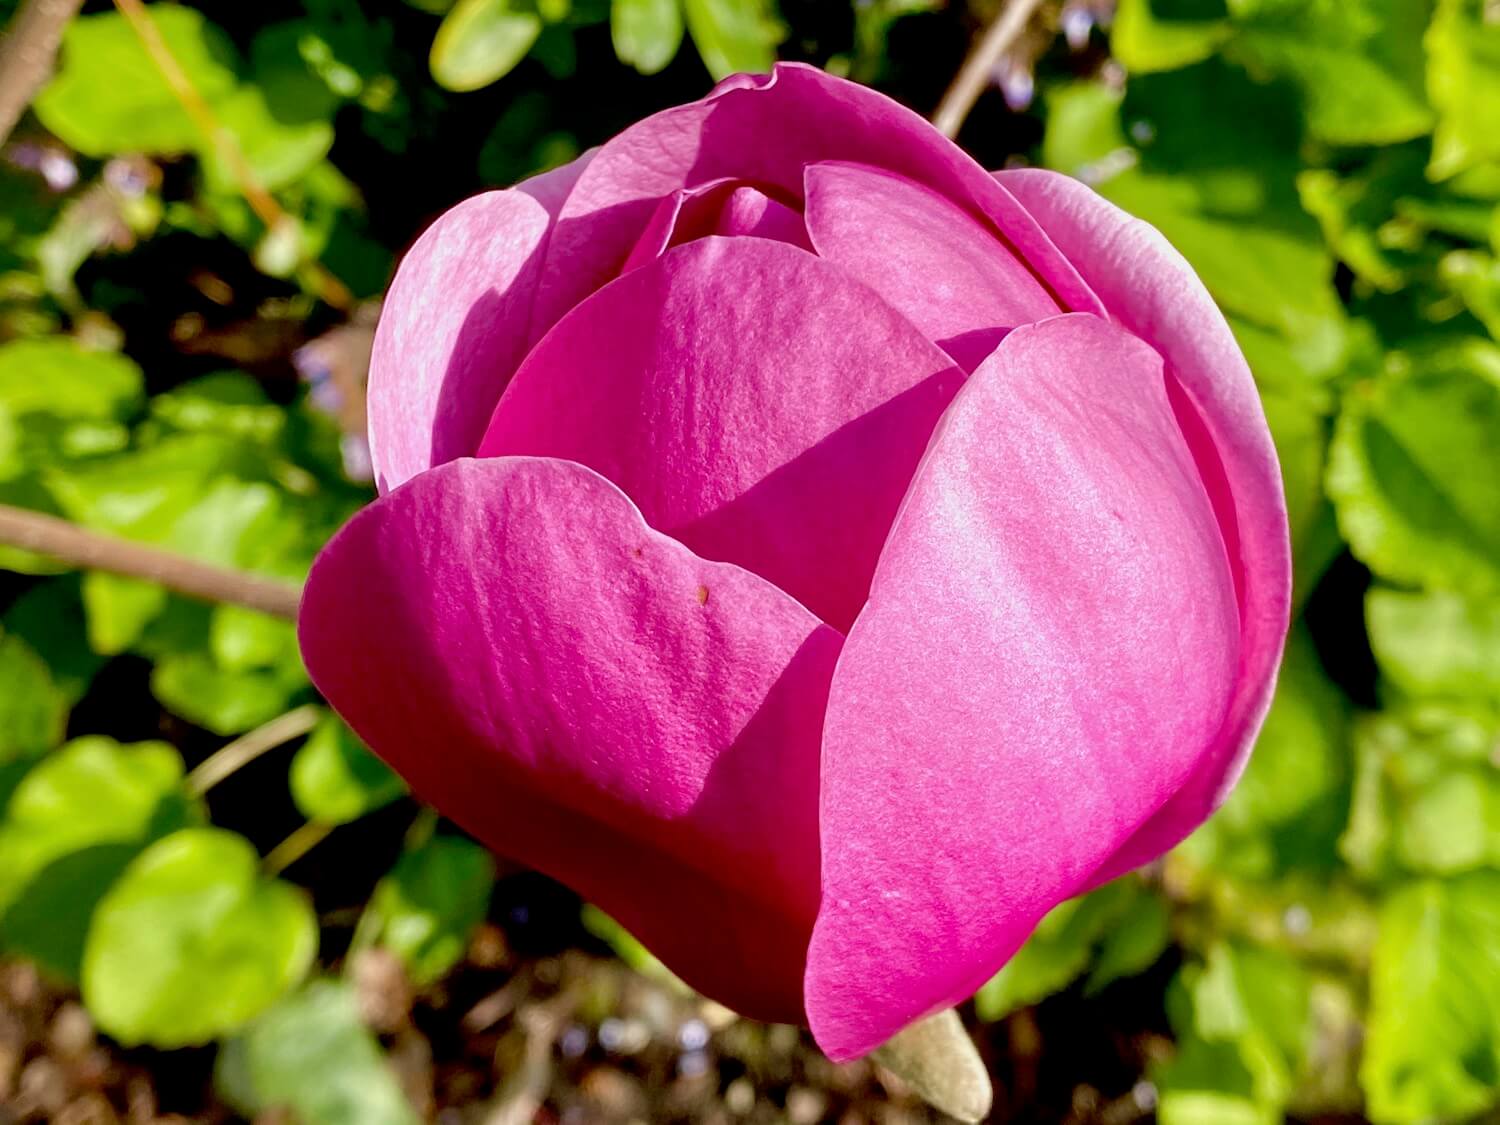 Closeup of a freshly bloomed Black Tulip Magnolia, with rich pink colored petals just beginning to relax from the tight ball of the bud. In the background is fresh green out of focus foliage.